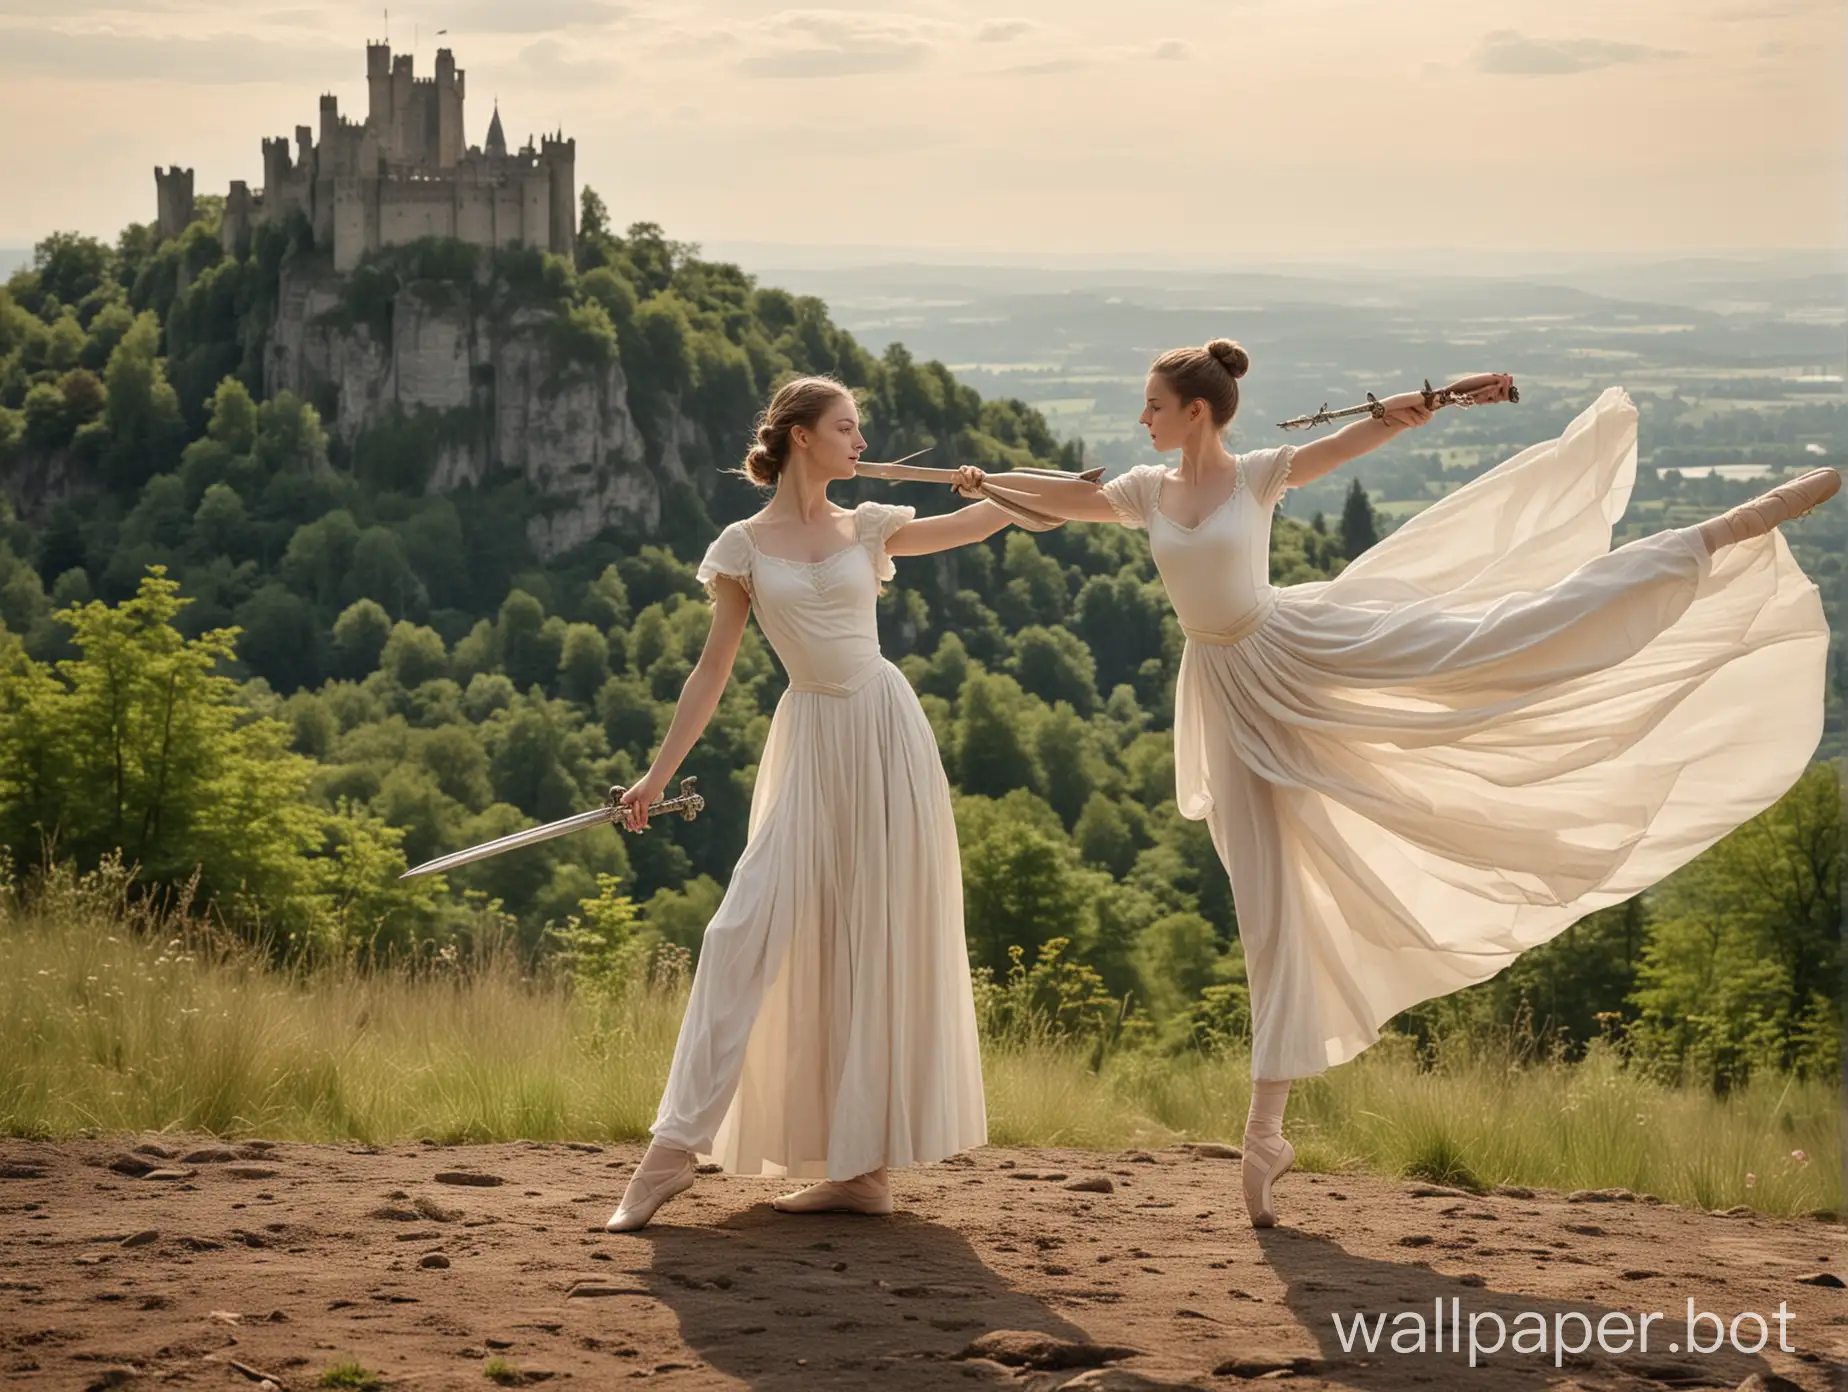 a Woman aged 25 in a long white gown, she is holding a sword. Standing beside her is a girl aged 15 in ballet attire and pointe shoes. There is a castle on a hilltop in the distance while the surounding area is a forest